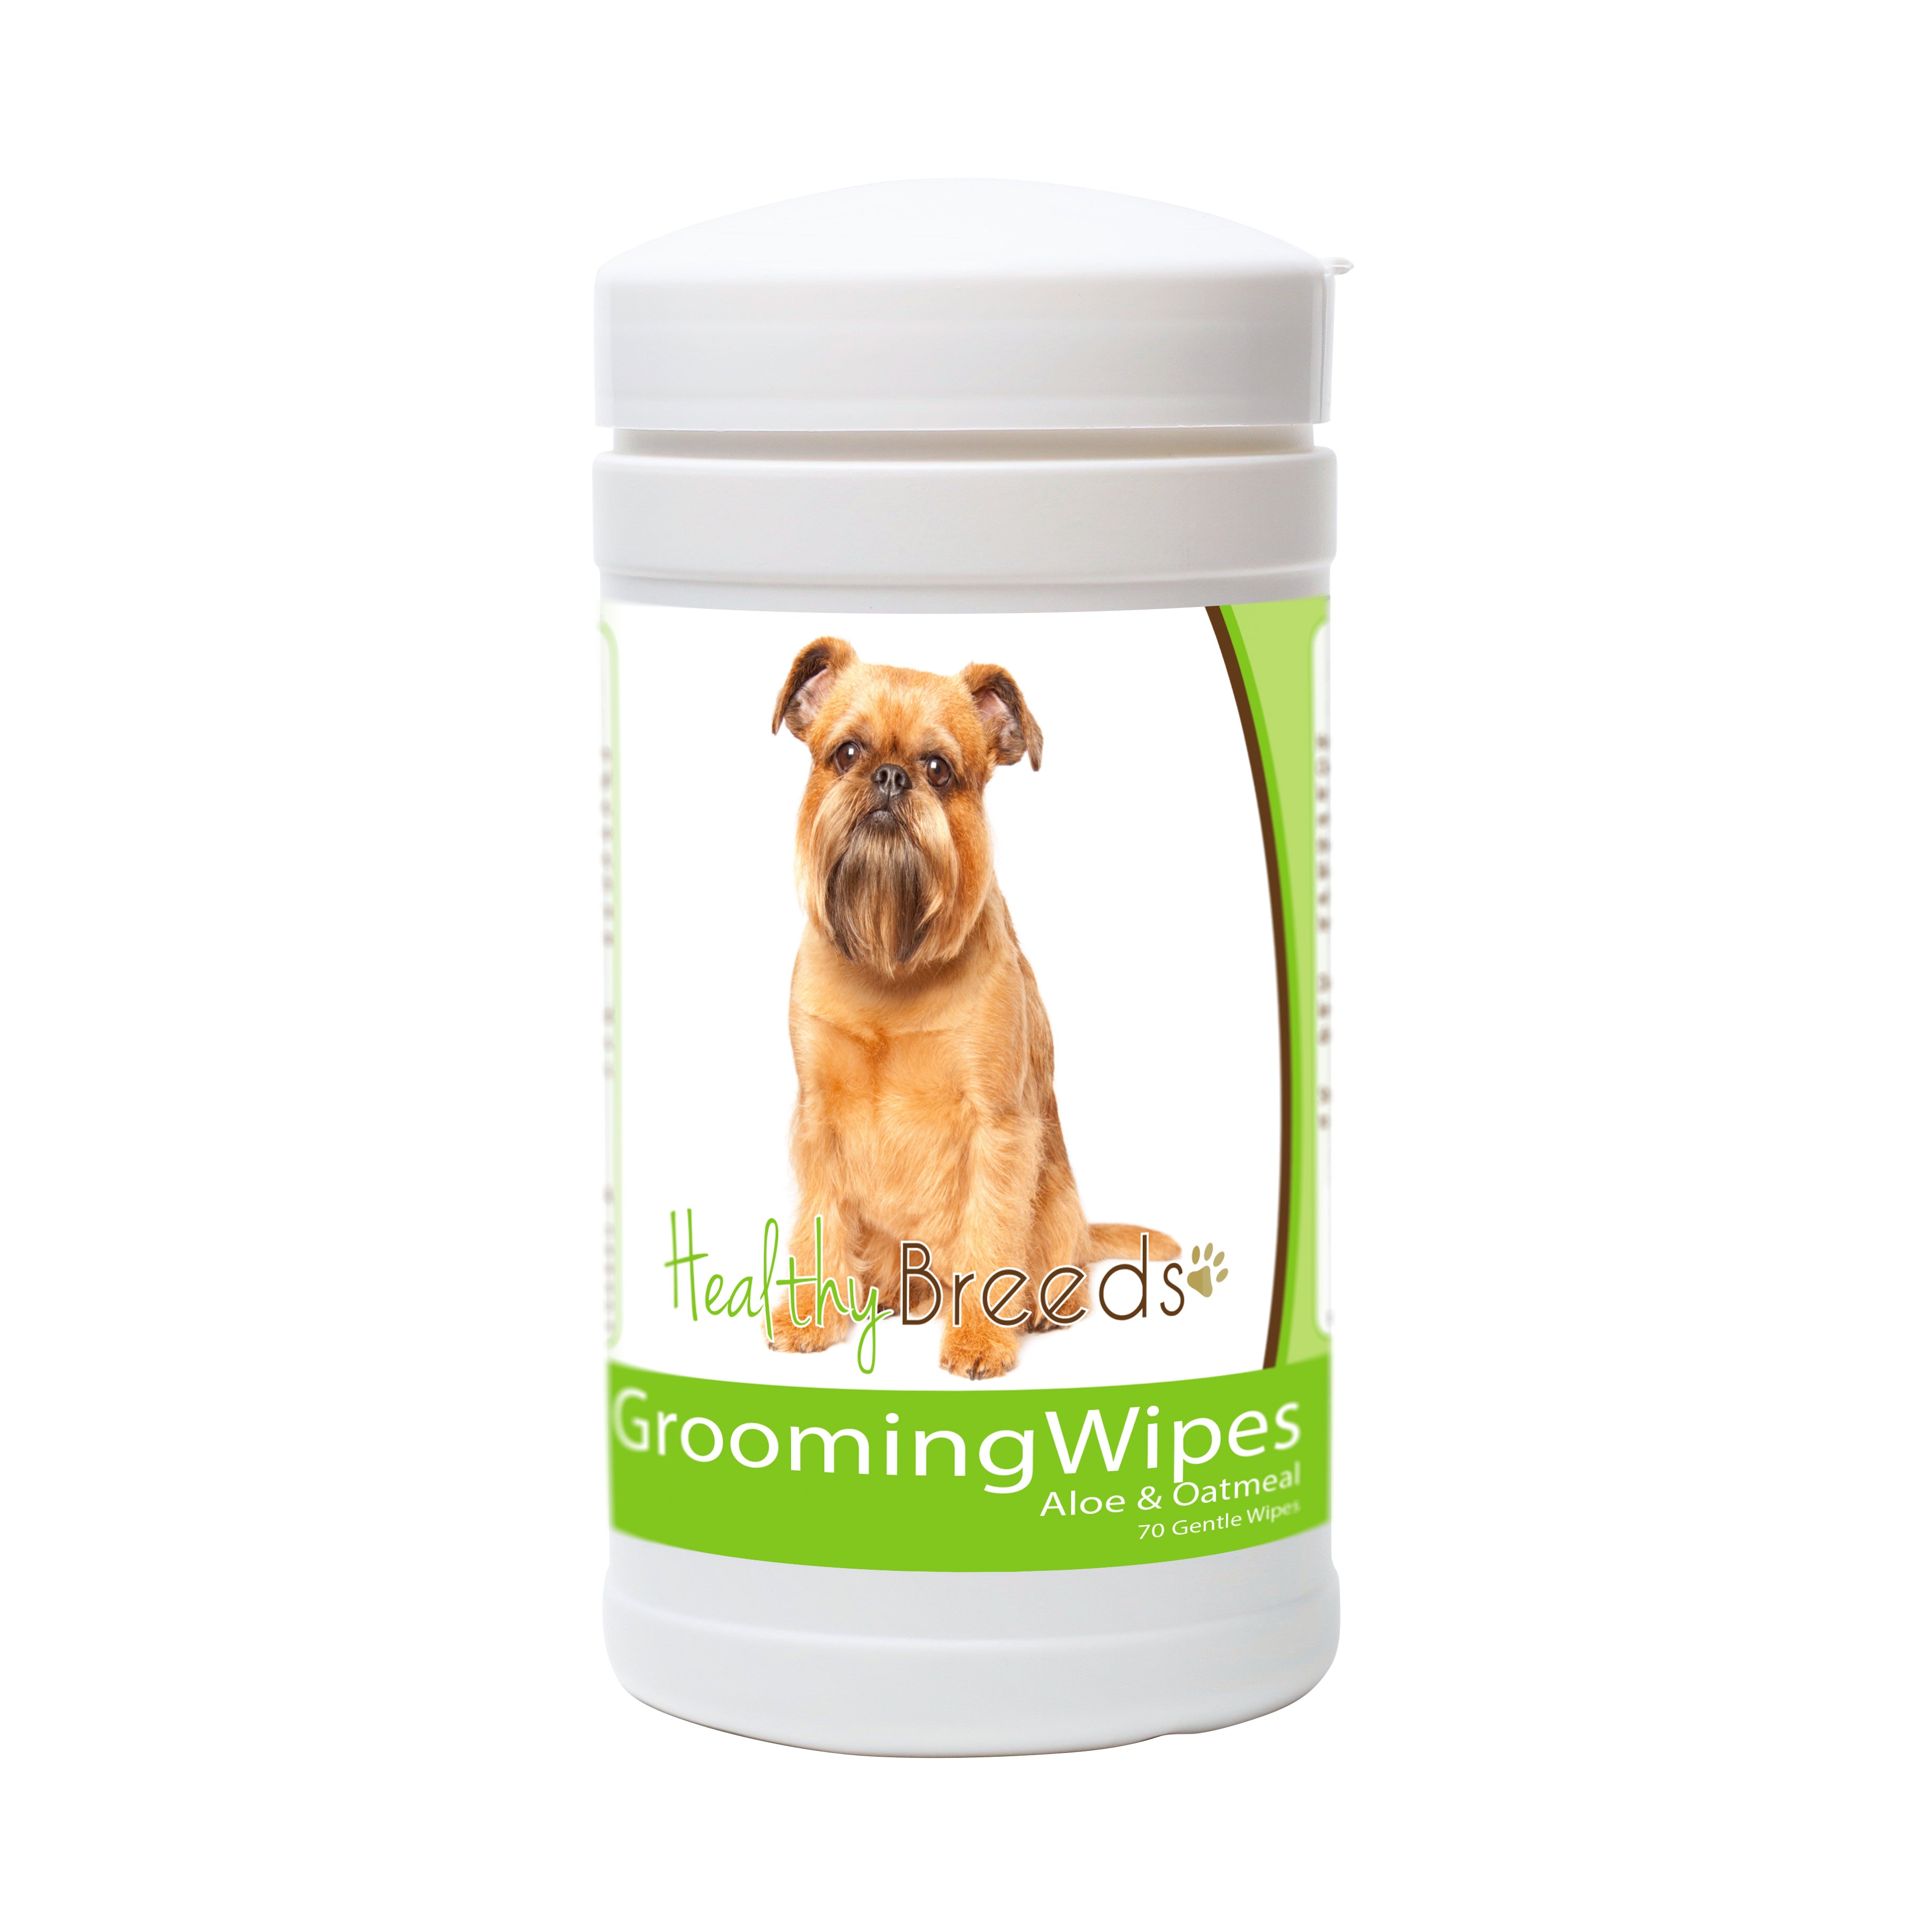 Brussels Griffon Grooming Wipes 70 Count